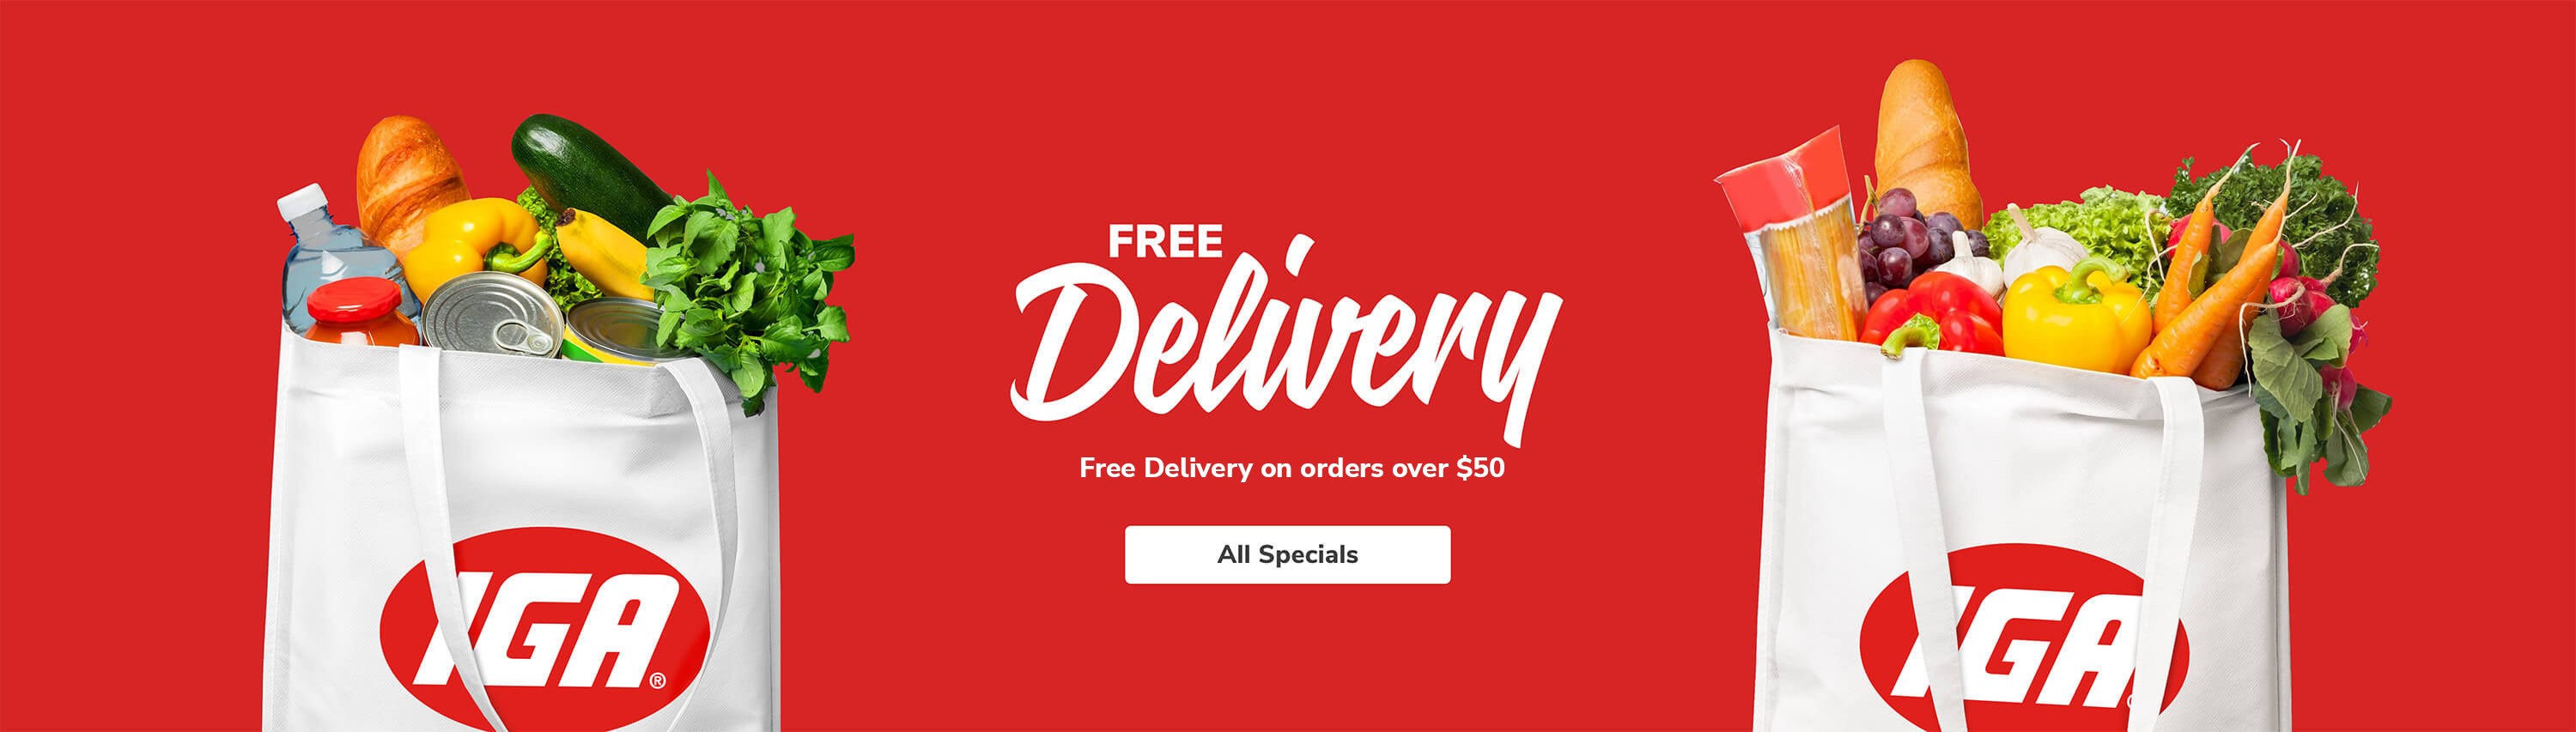 Free delivery on orders over $50 at IGA.